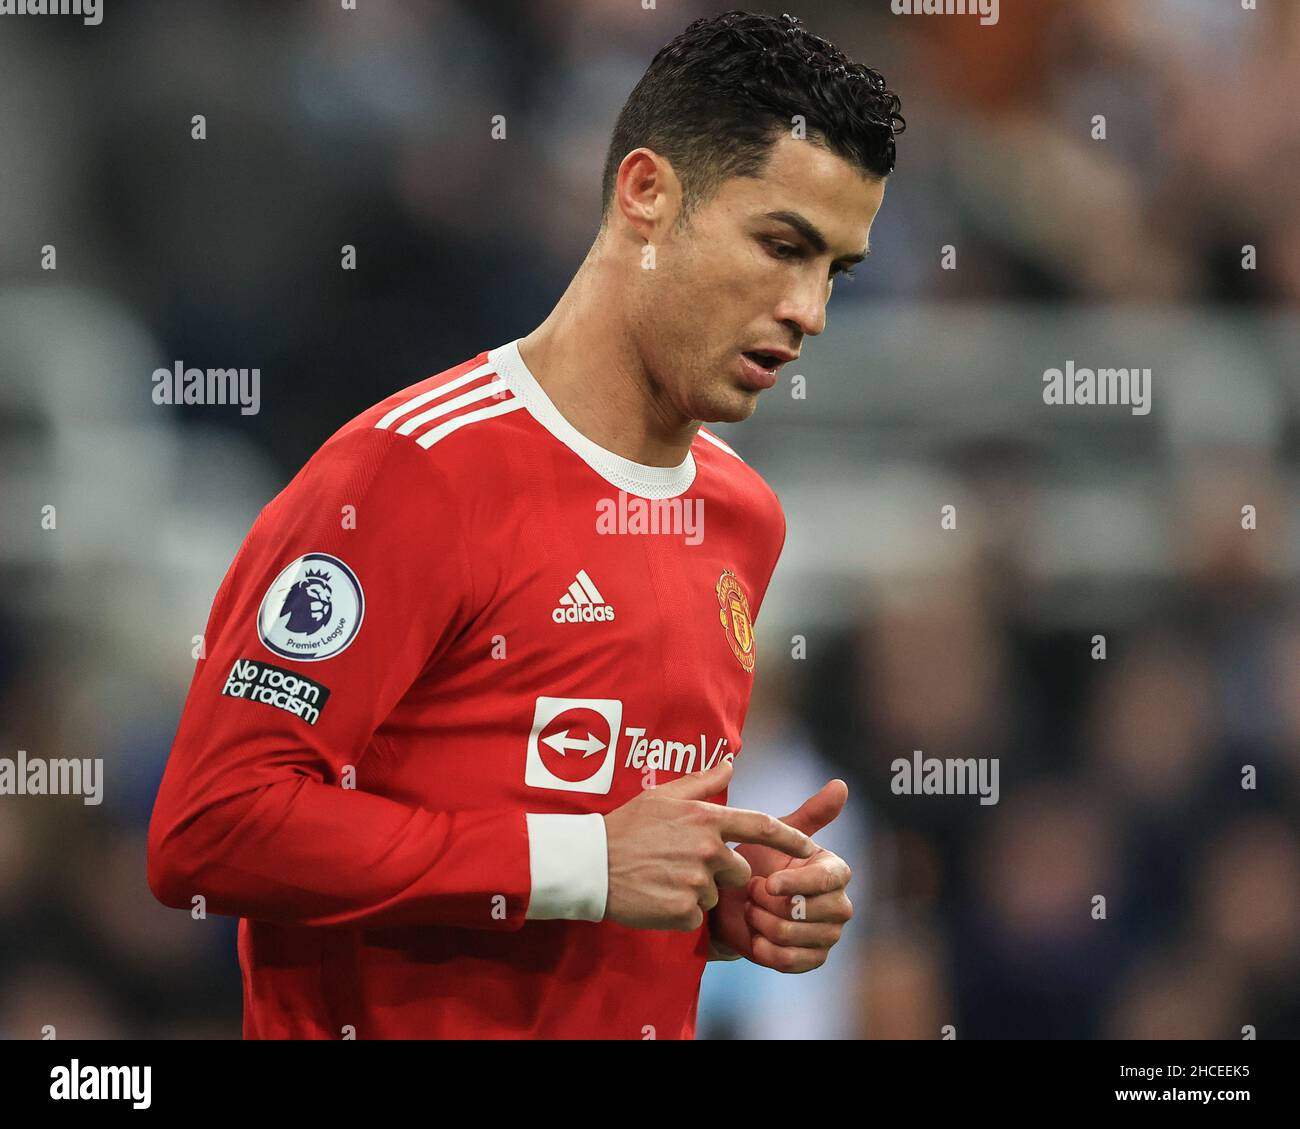 Newcastle, UK. 27th Dec, 2021. Cristiano Ronaldo #7 of Manchester United during the game in Newcastle, United Kingdom on 12/27/2021. (Photo by Mark Cosgrove/News Images/Sipa USA) Credit: Sipa USA/Alamy Live News Stock Photo